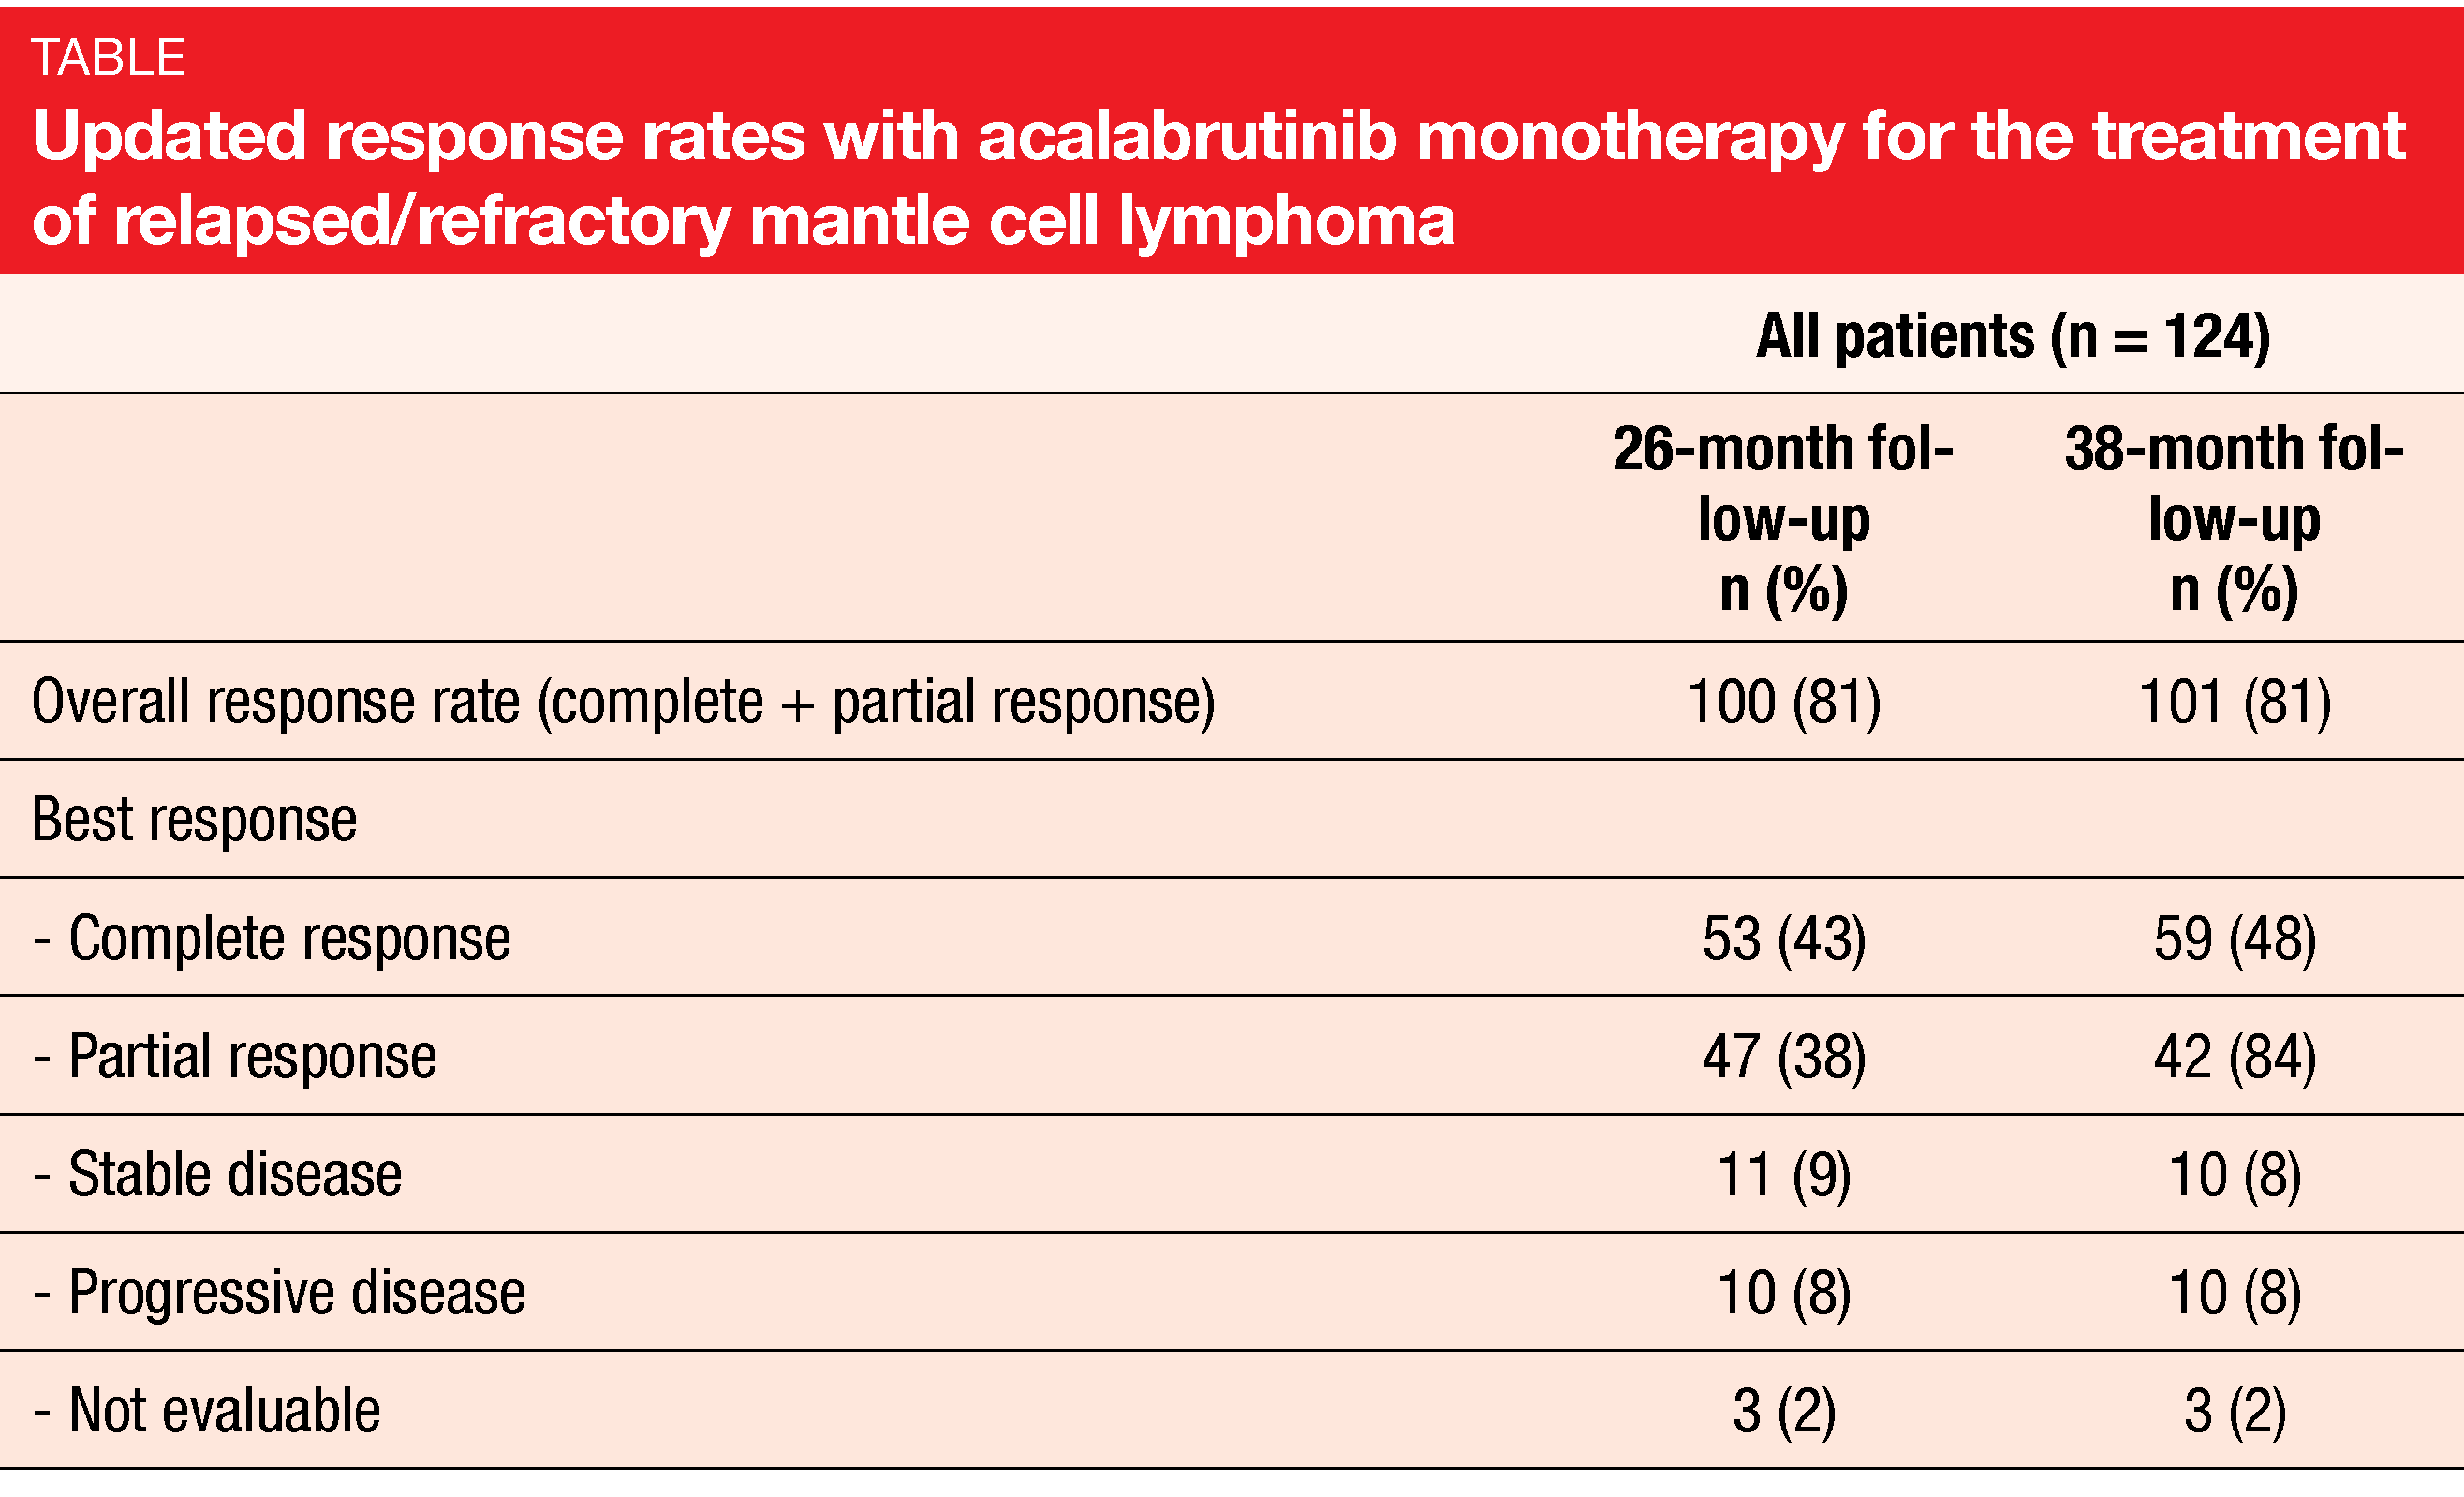 Table Updated response rates with acalabrutinib monotherapy for the treatment of relapsed/refractory mantle cell lymphoma